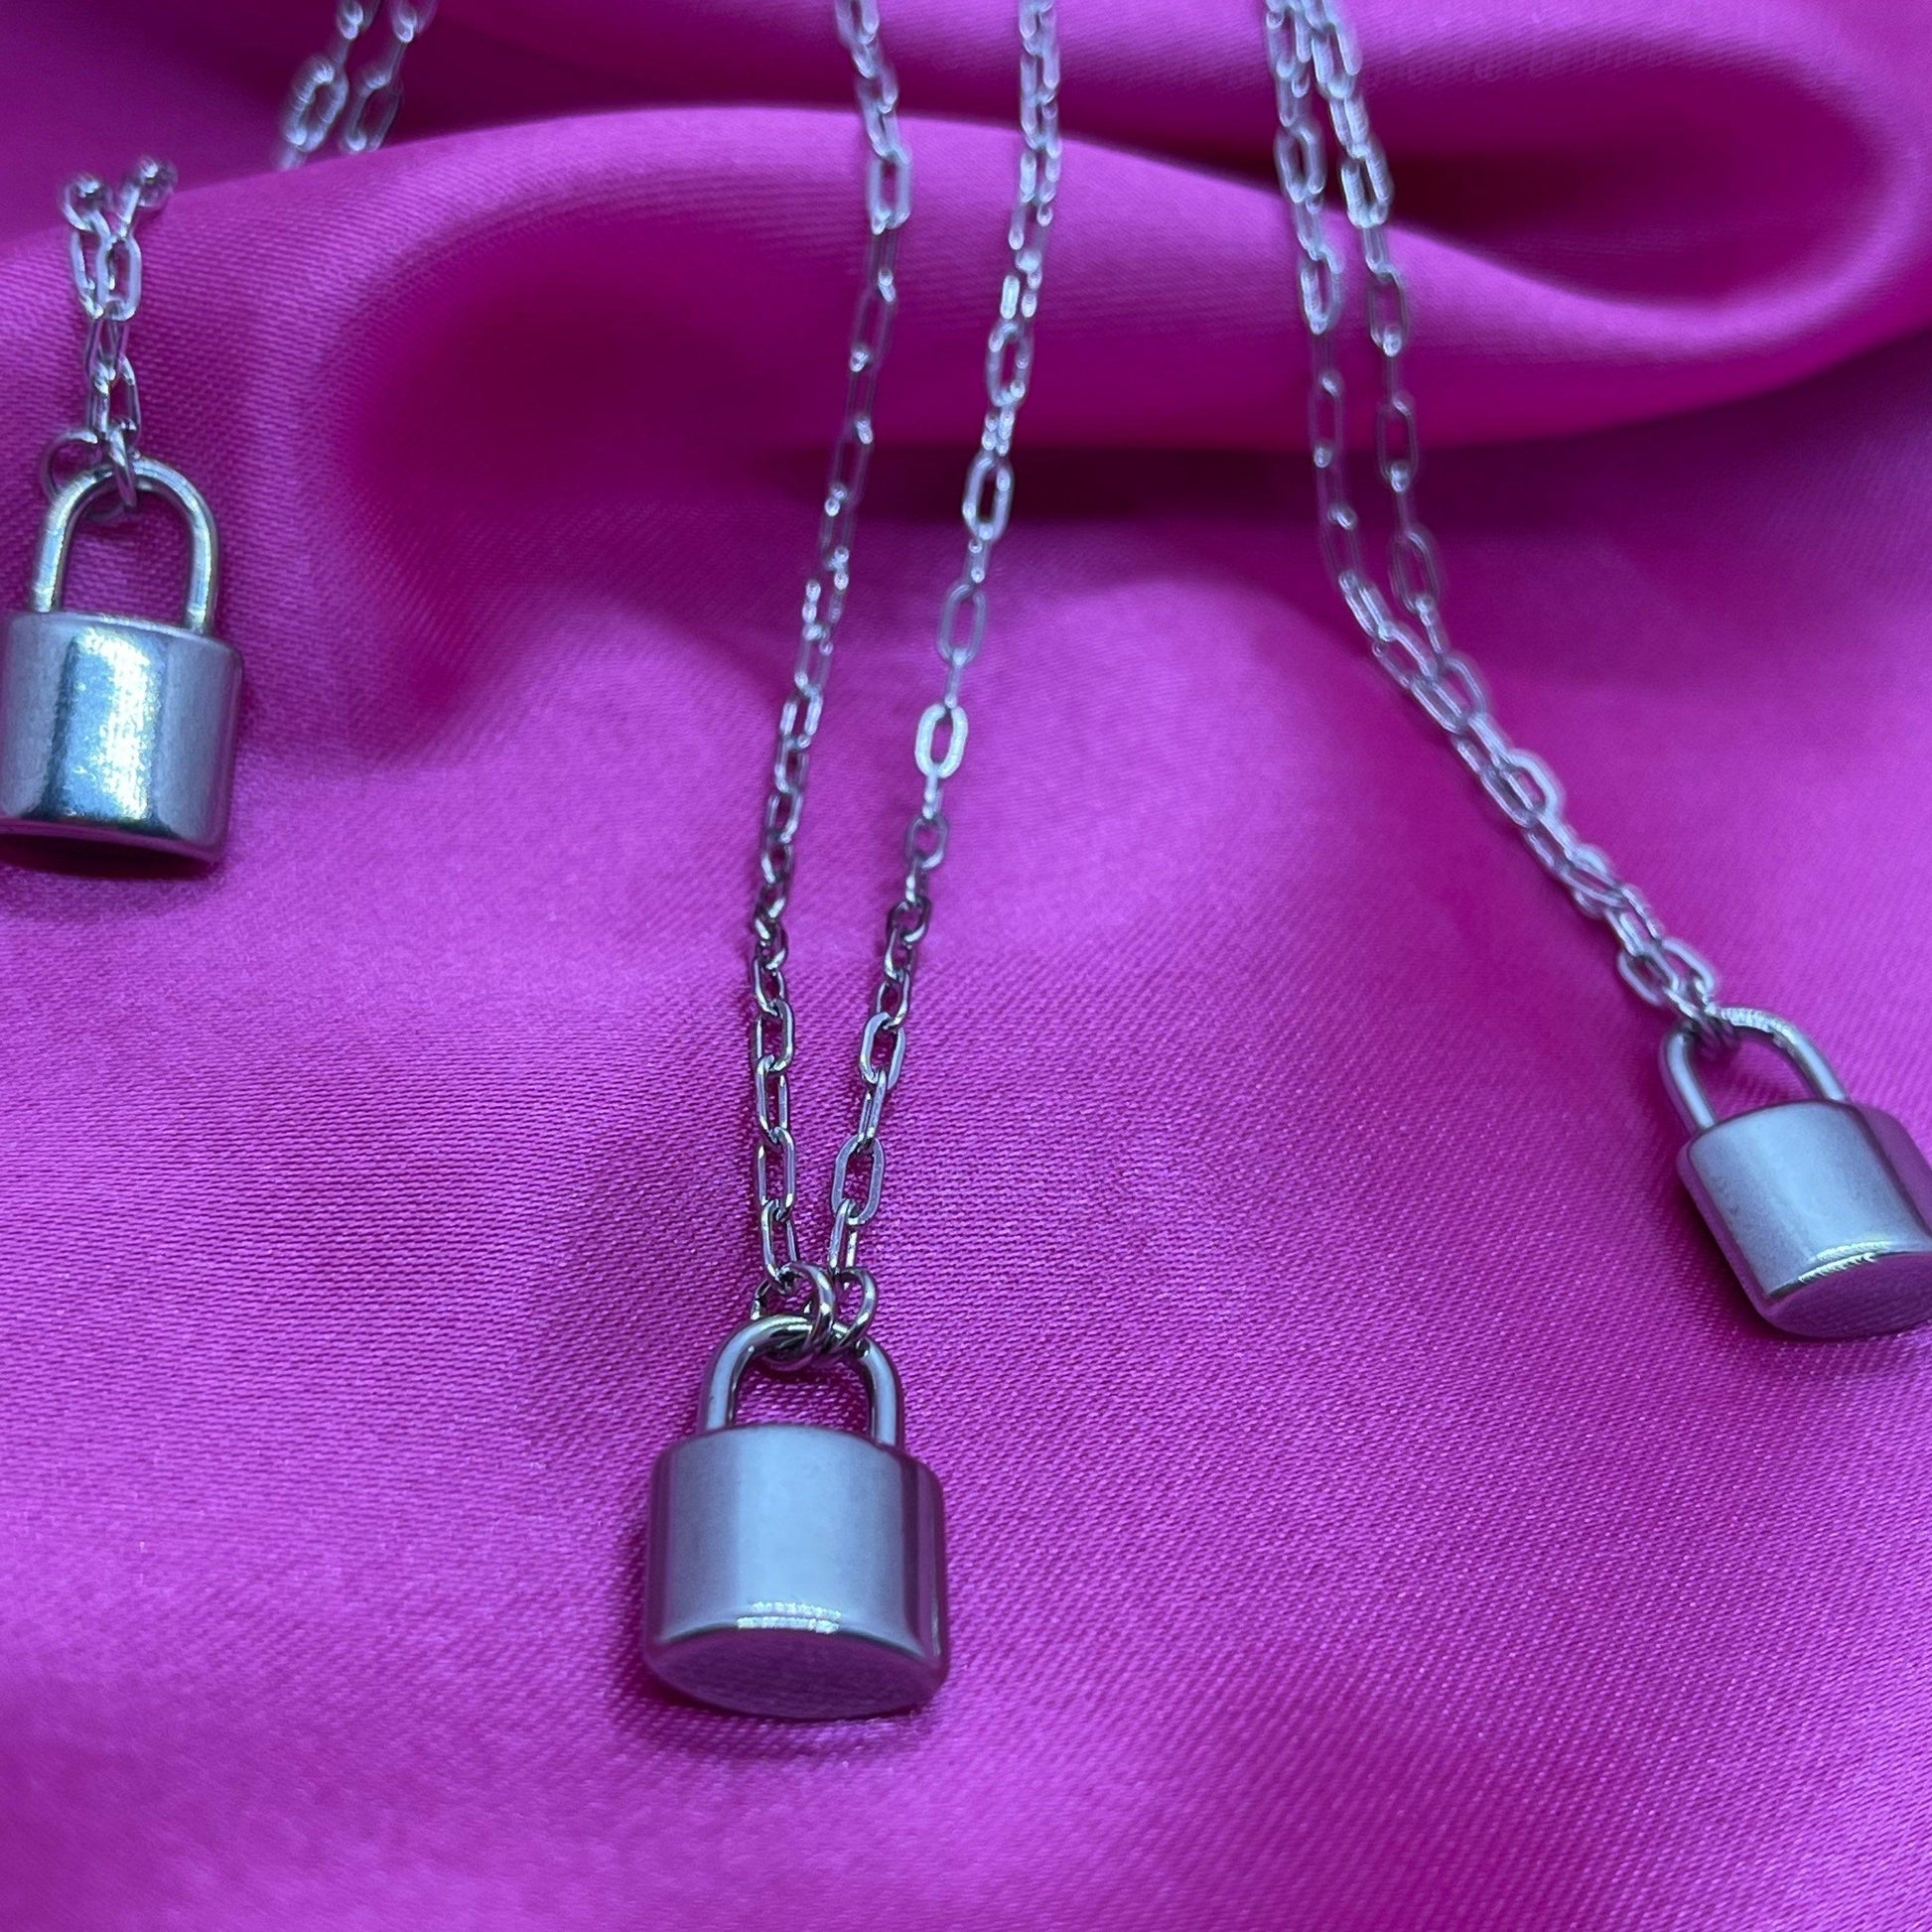 Lock Charm Necklace - Lxyclr Authentic